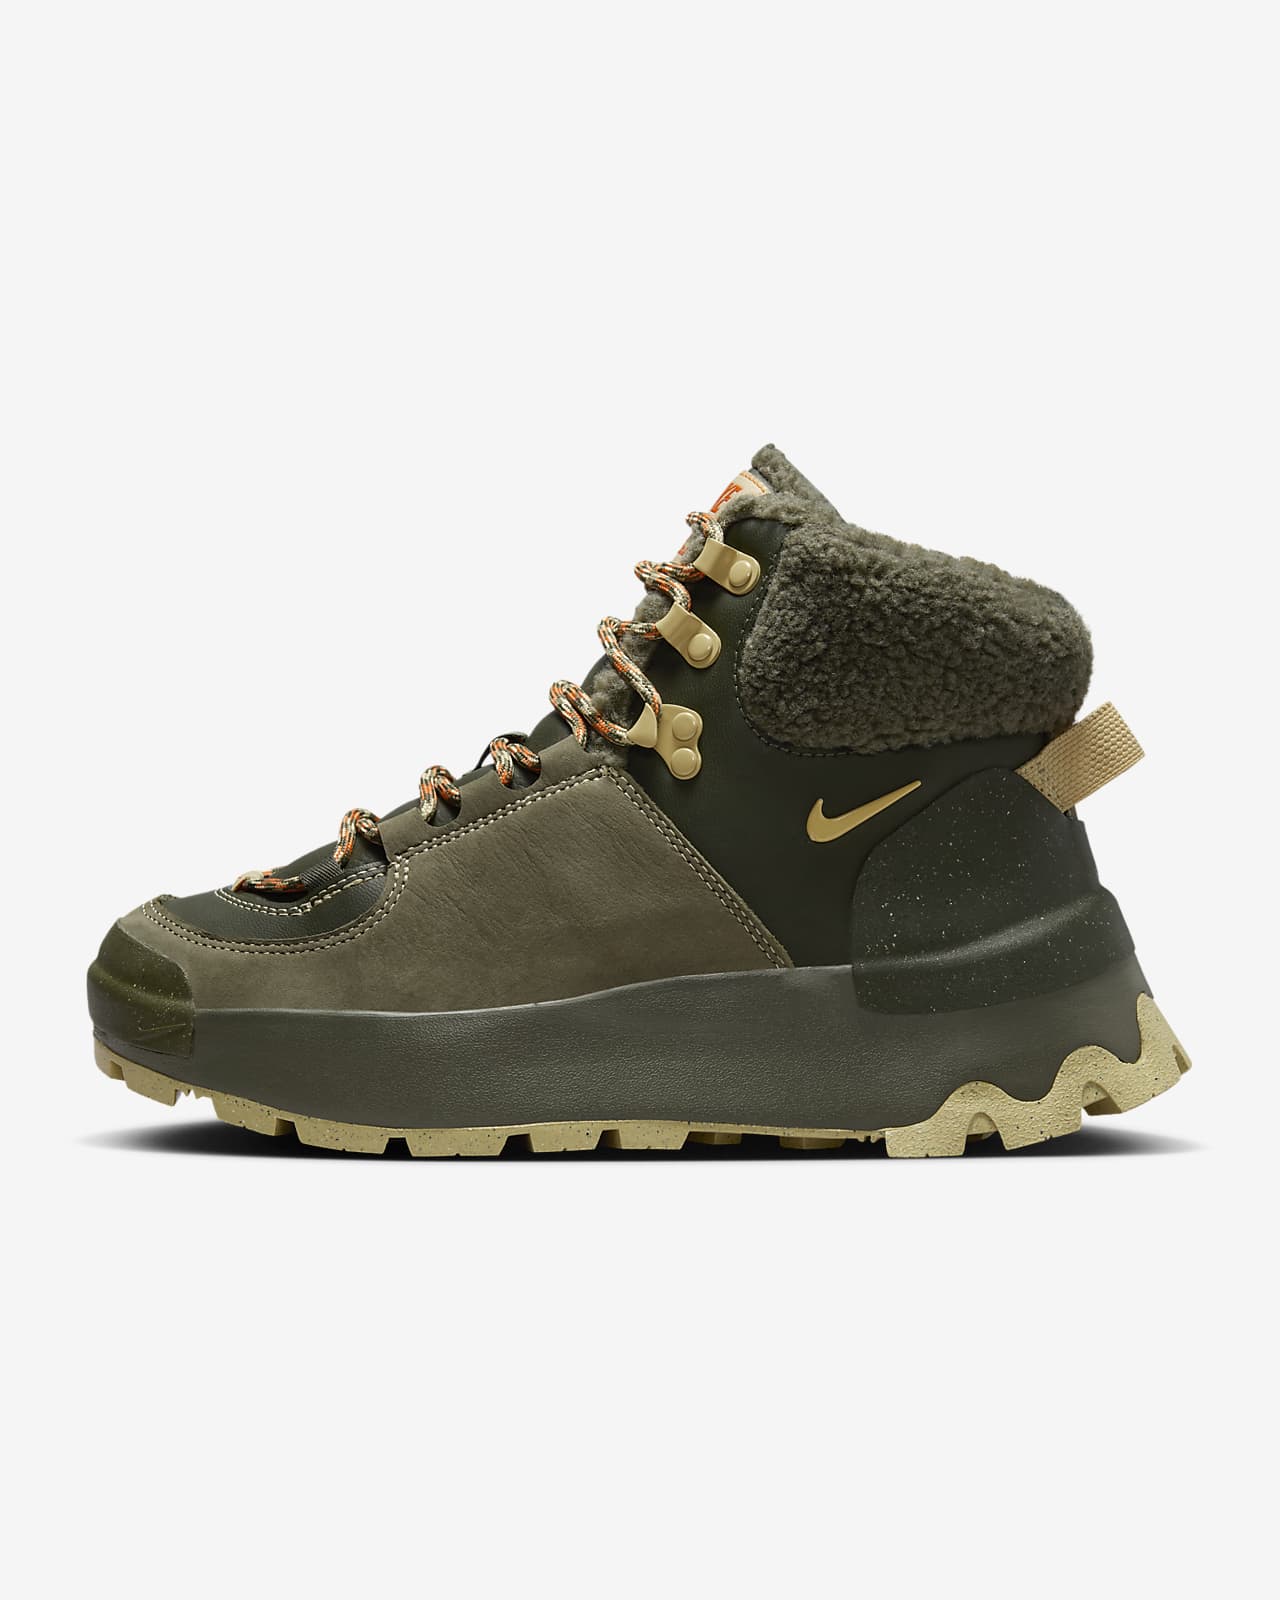 Nike City Classic Premium Botas impermeables - Mujer